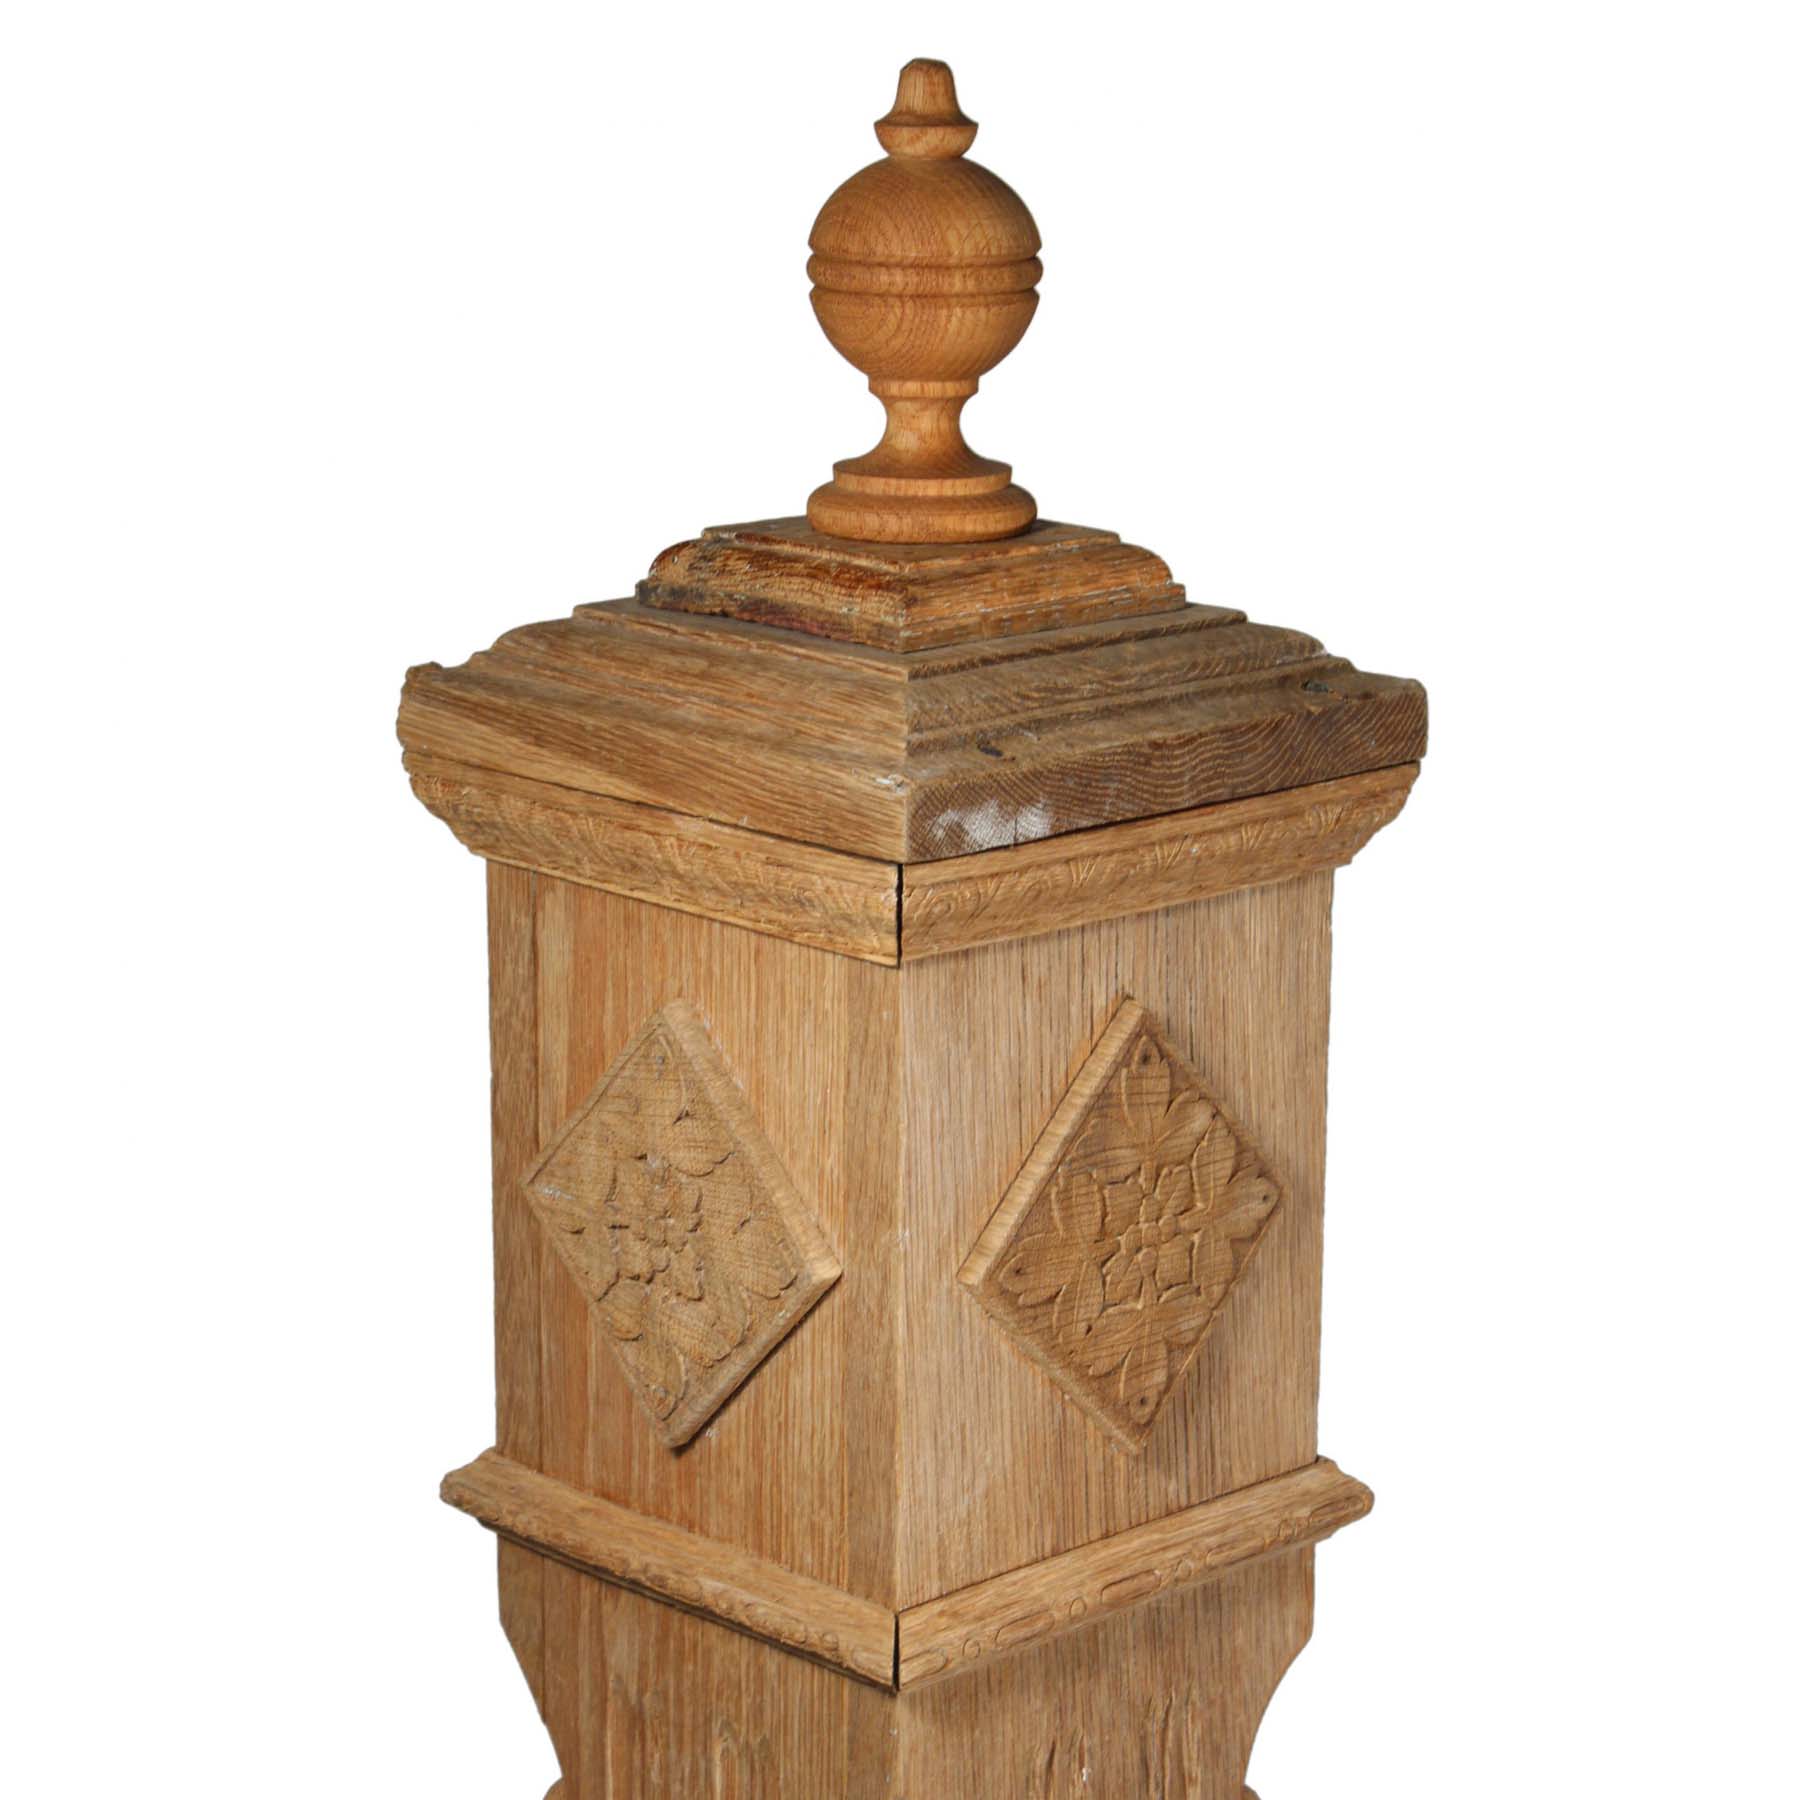 SOLD Antique Boxed Newel Post, 19th Century-69762